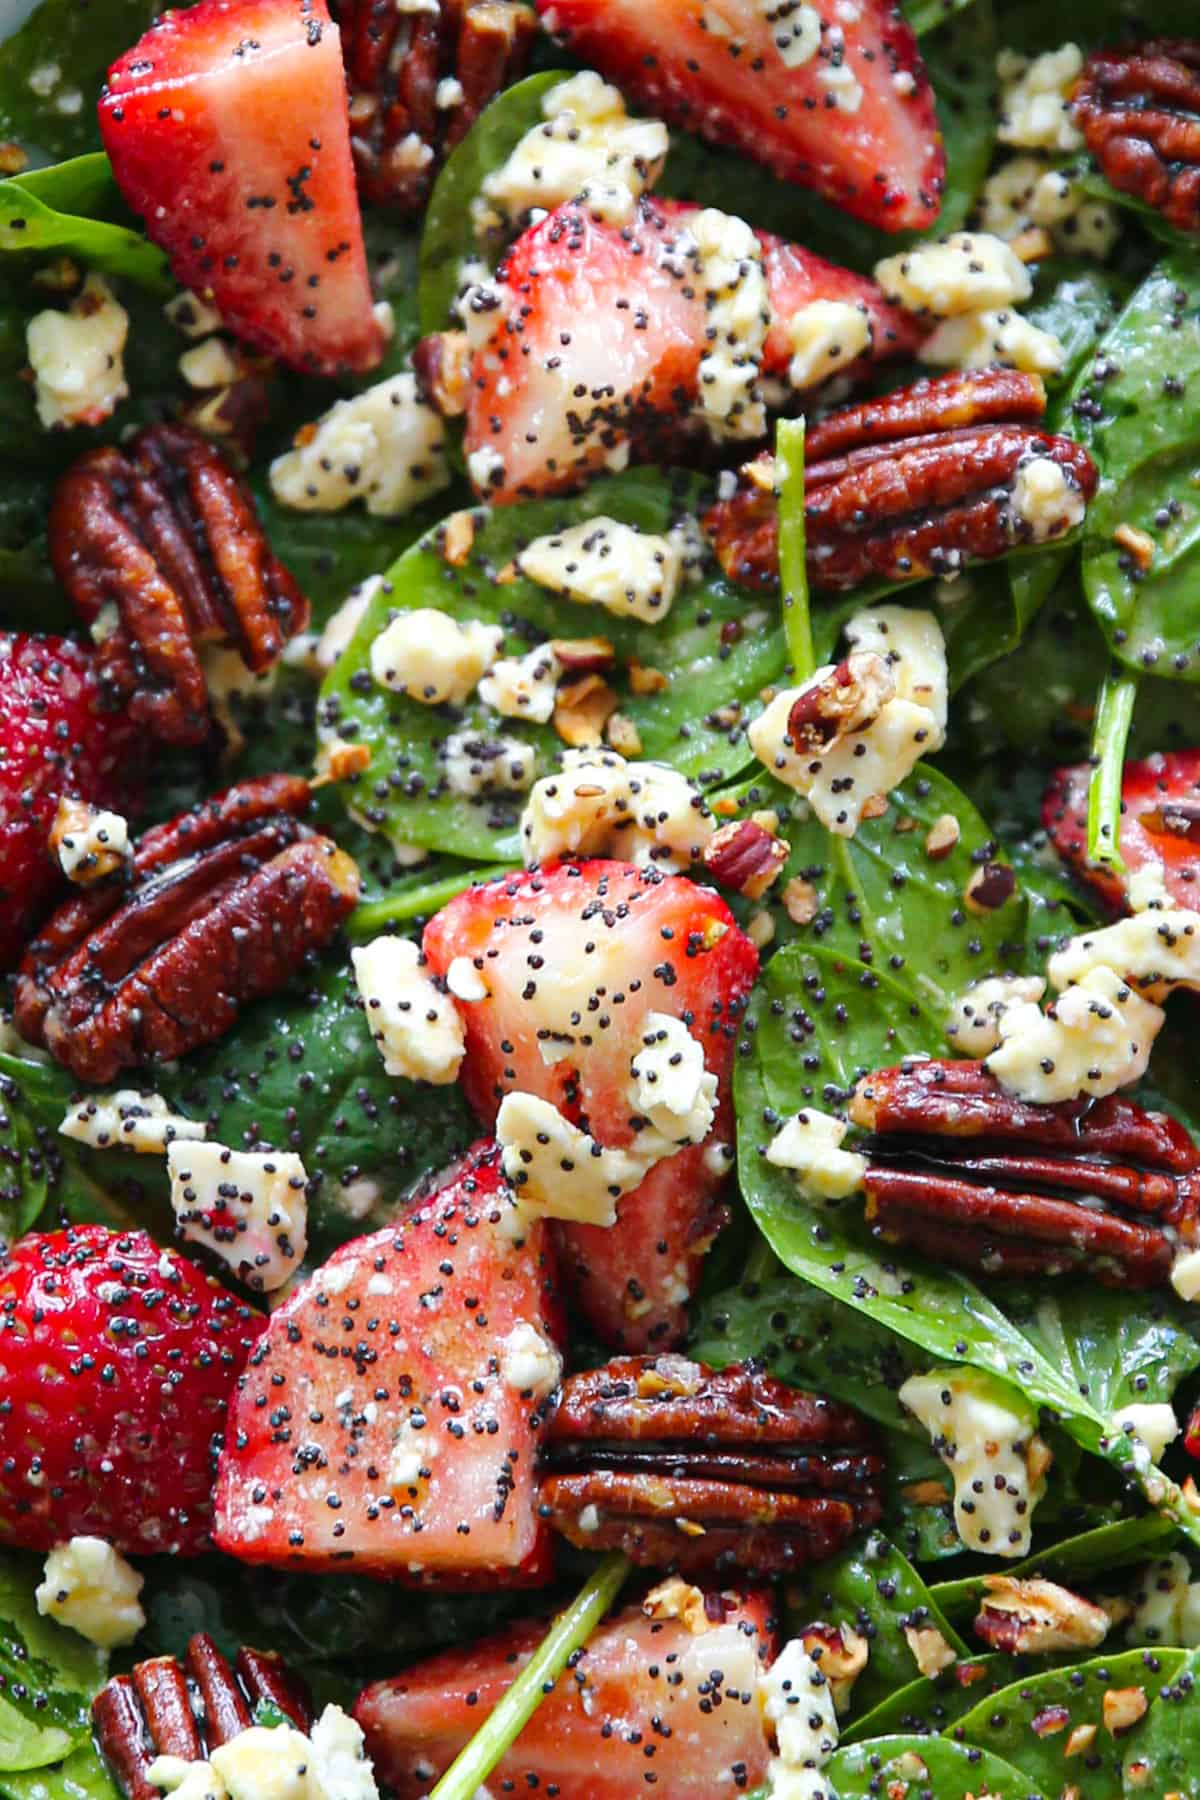 Strawberry Spinach Salad with Pecans, Feta Cheese, and Poppy Seed Honey Lemon Dressing (close-up shot).